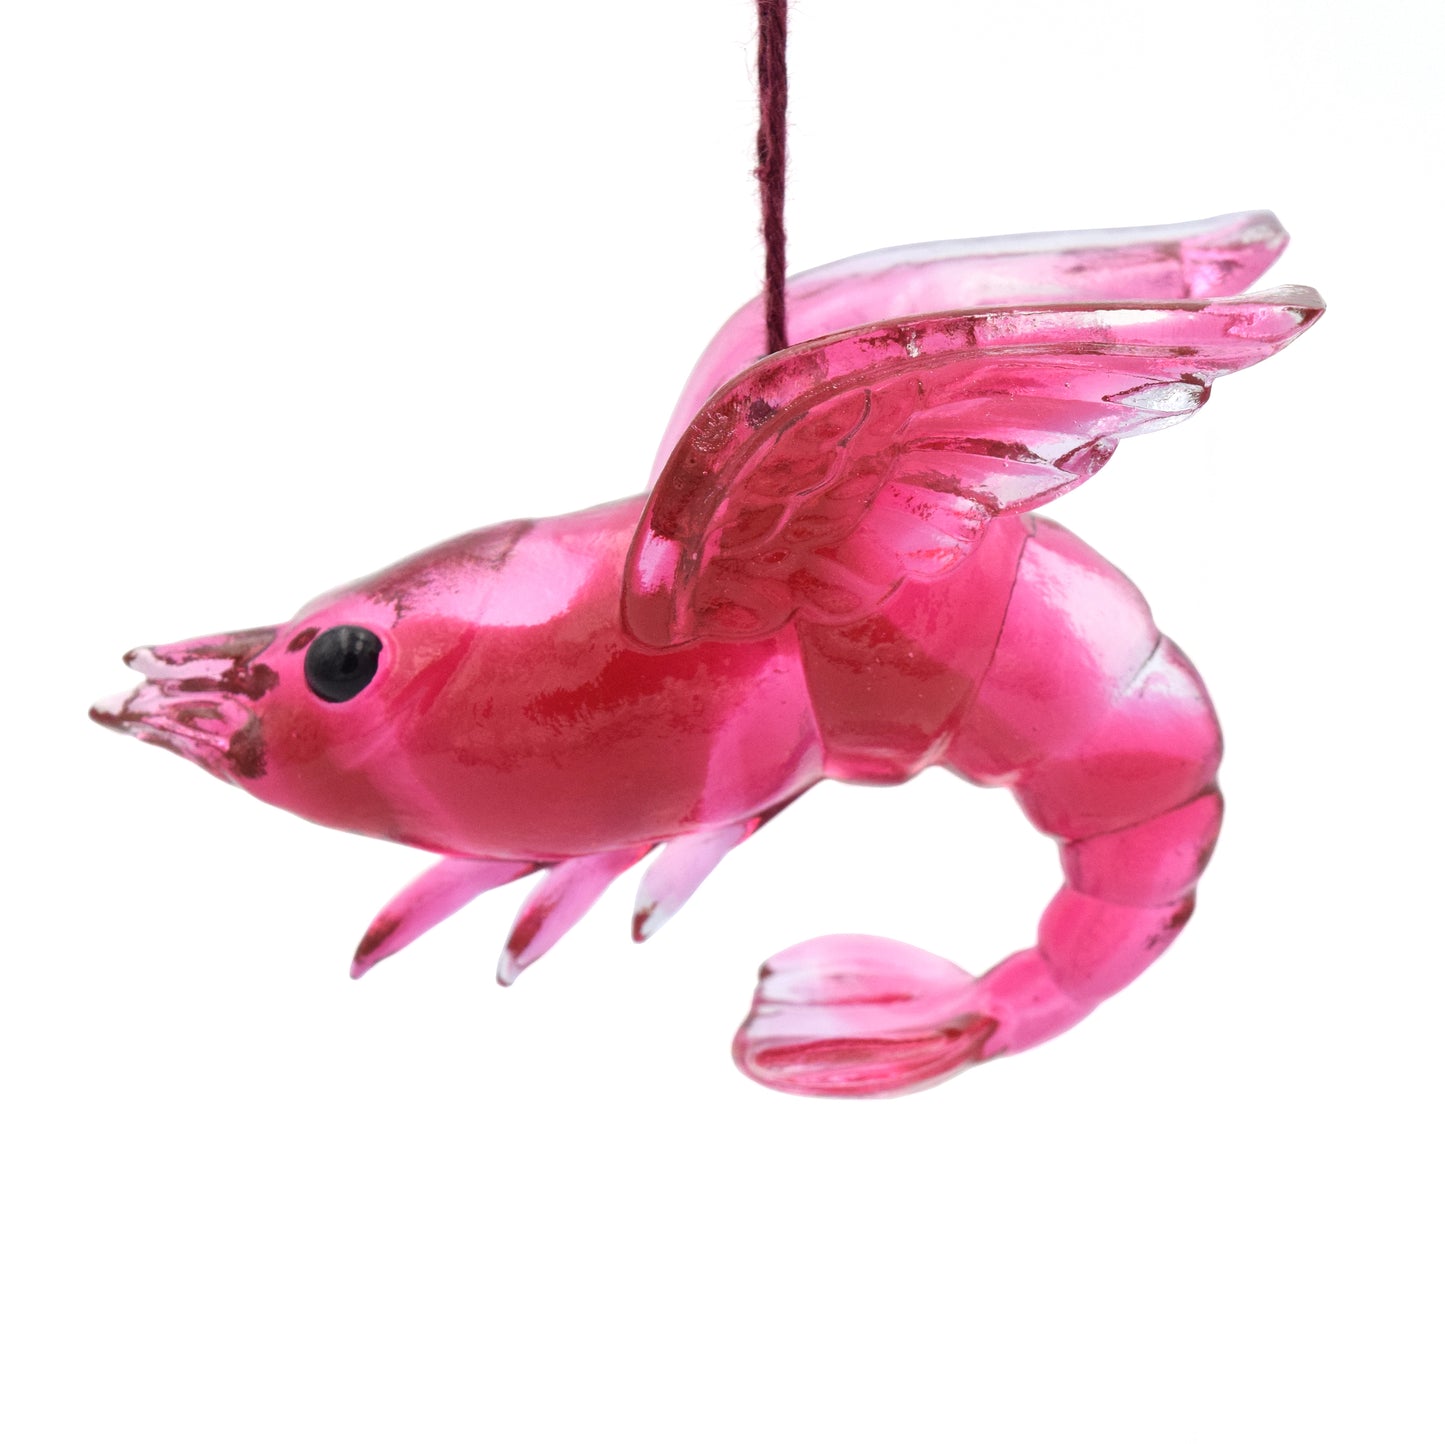 A translucent red shrimp ornament. The shrimp has wings and beady black eyes.